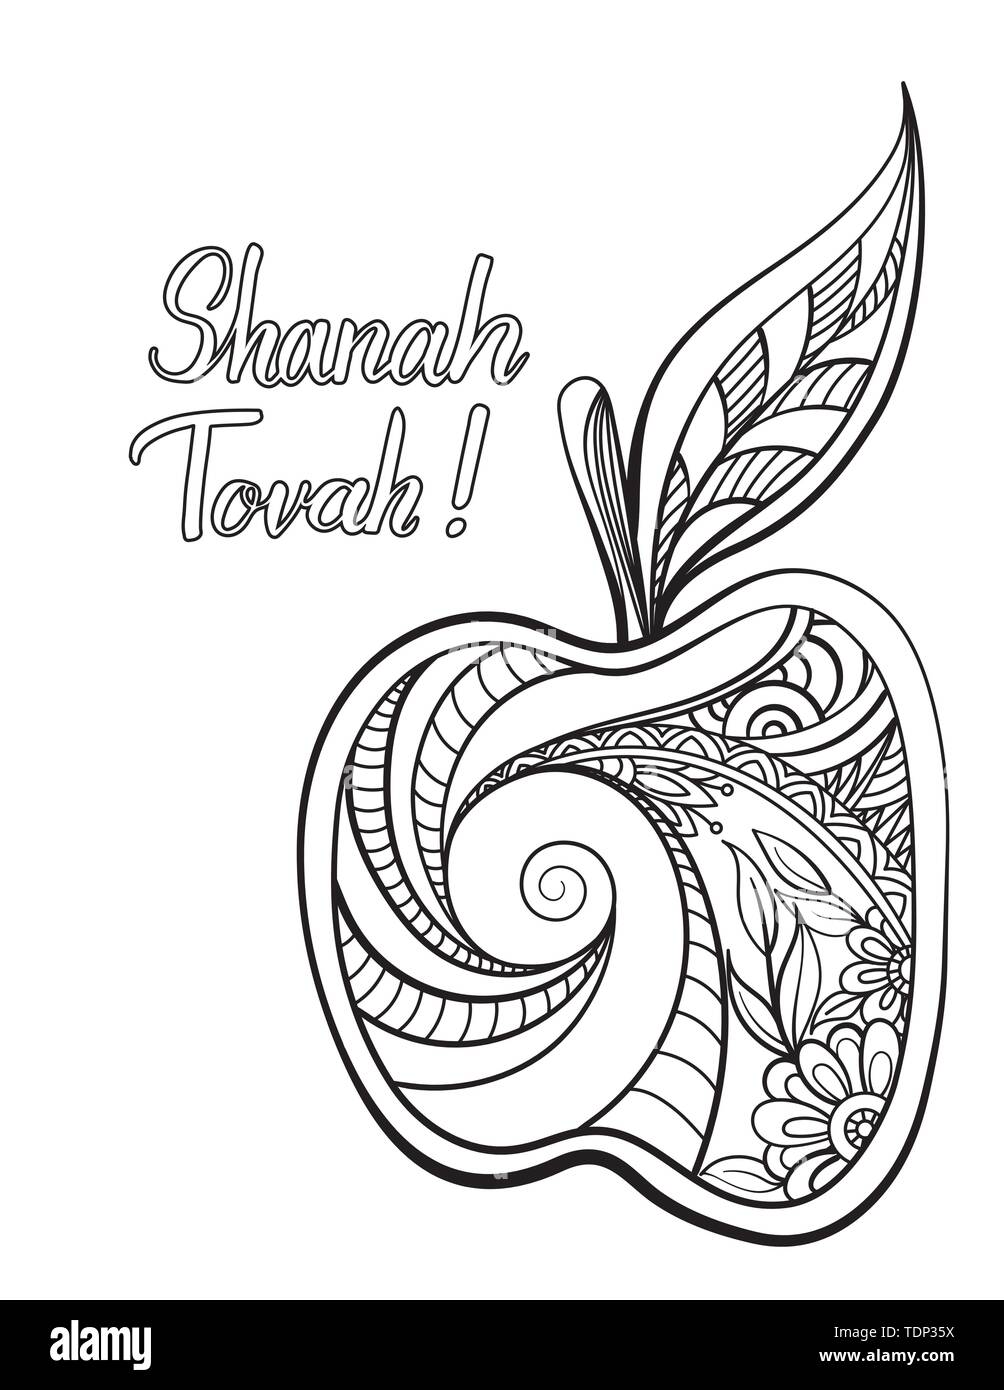 Rosh hashanah - Jewish New Year coloring page with apple. Hebrew text Happy New Year. Black and white vector illustration. Stock Vector